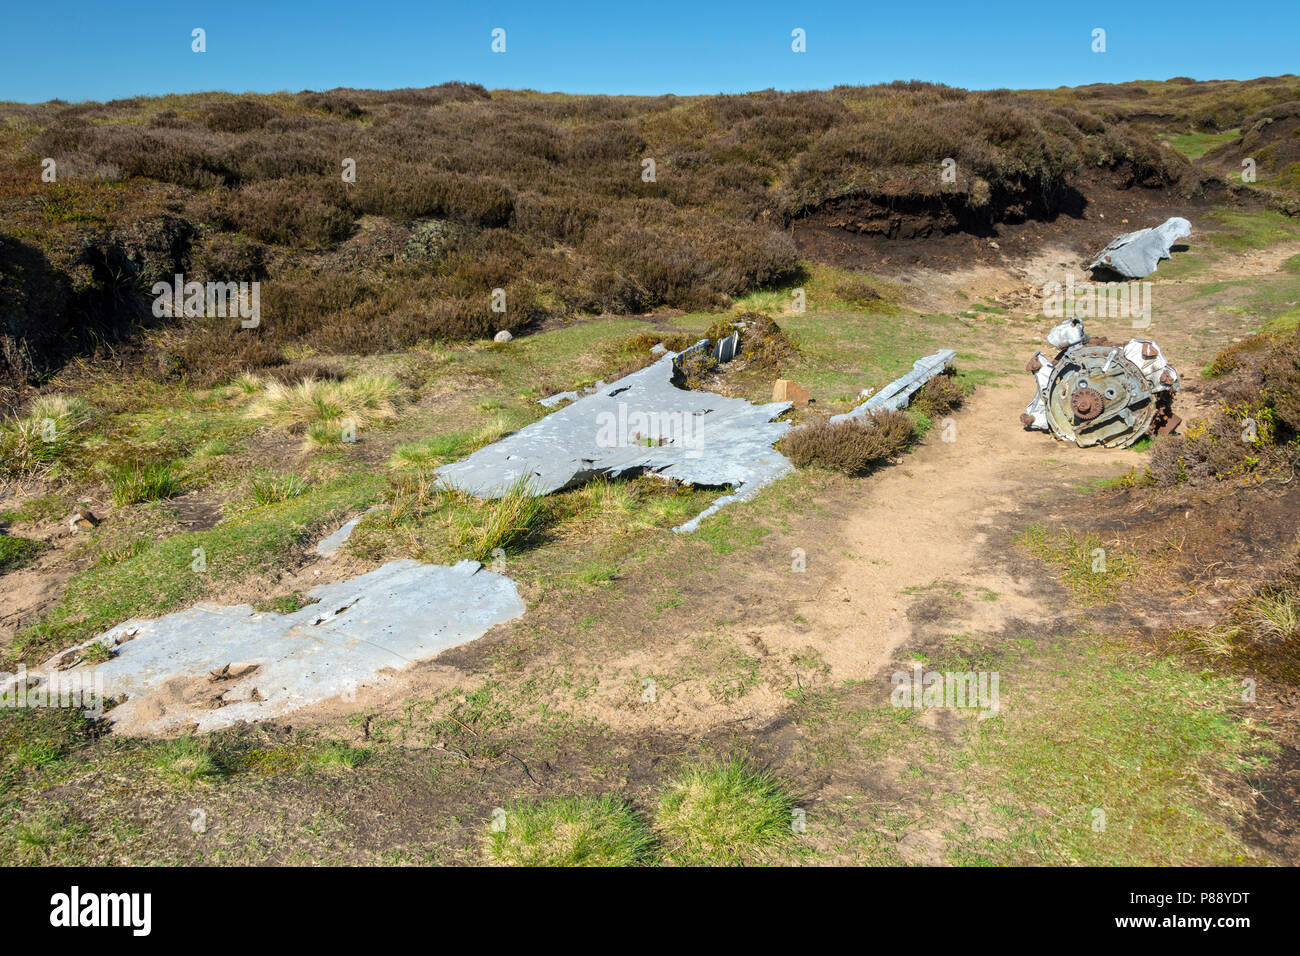 Remains of a US Liberator aircraft which crashed in 1944, on Mill Hill, near Glossop, Peak District, Derbyshire, England, UK. Stock Photo